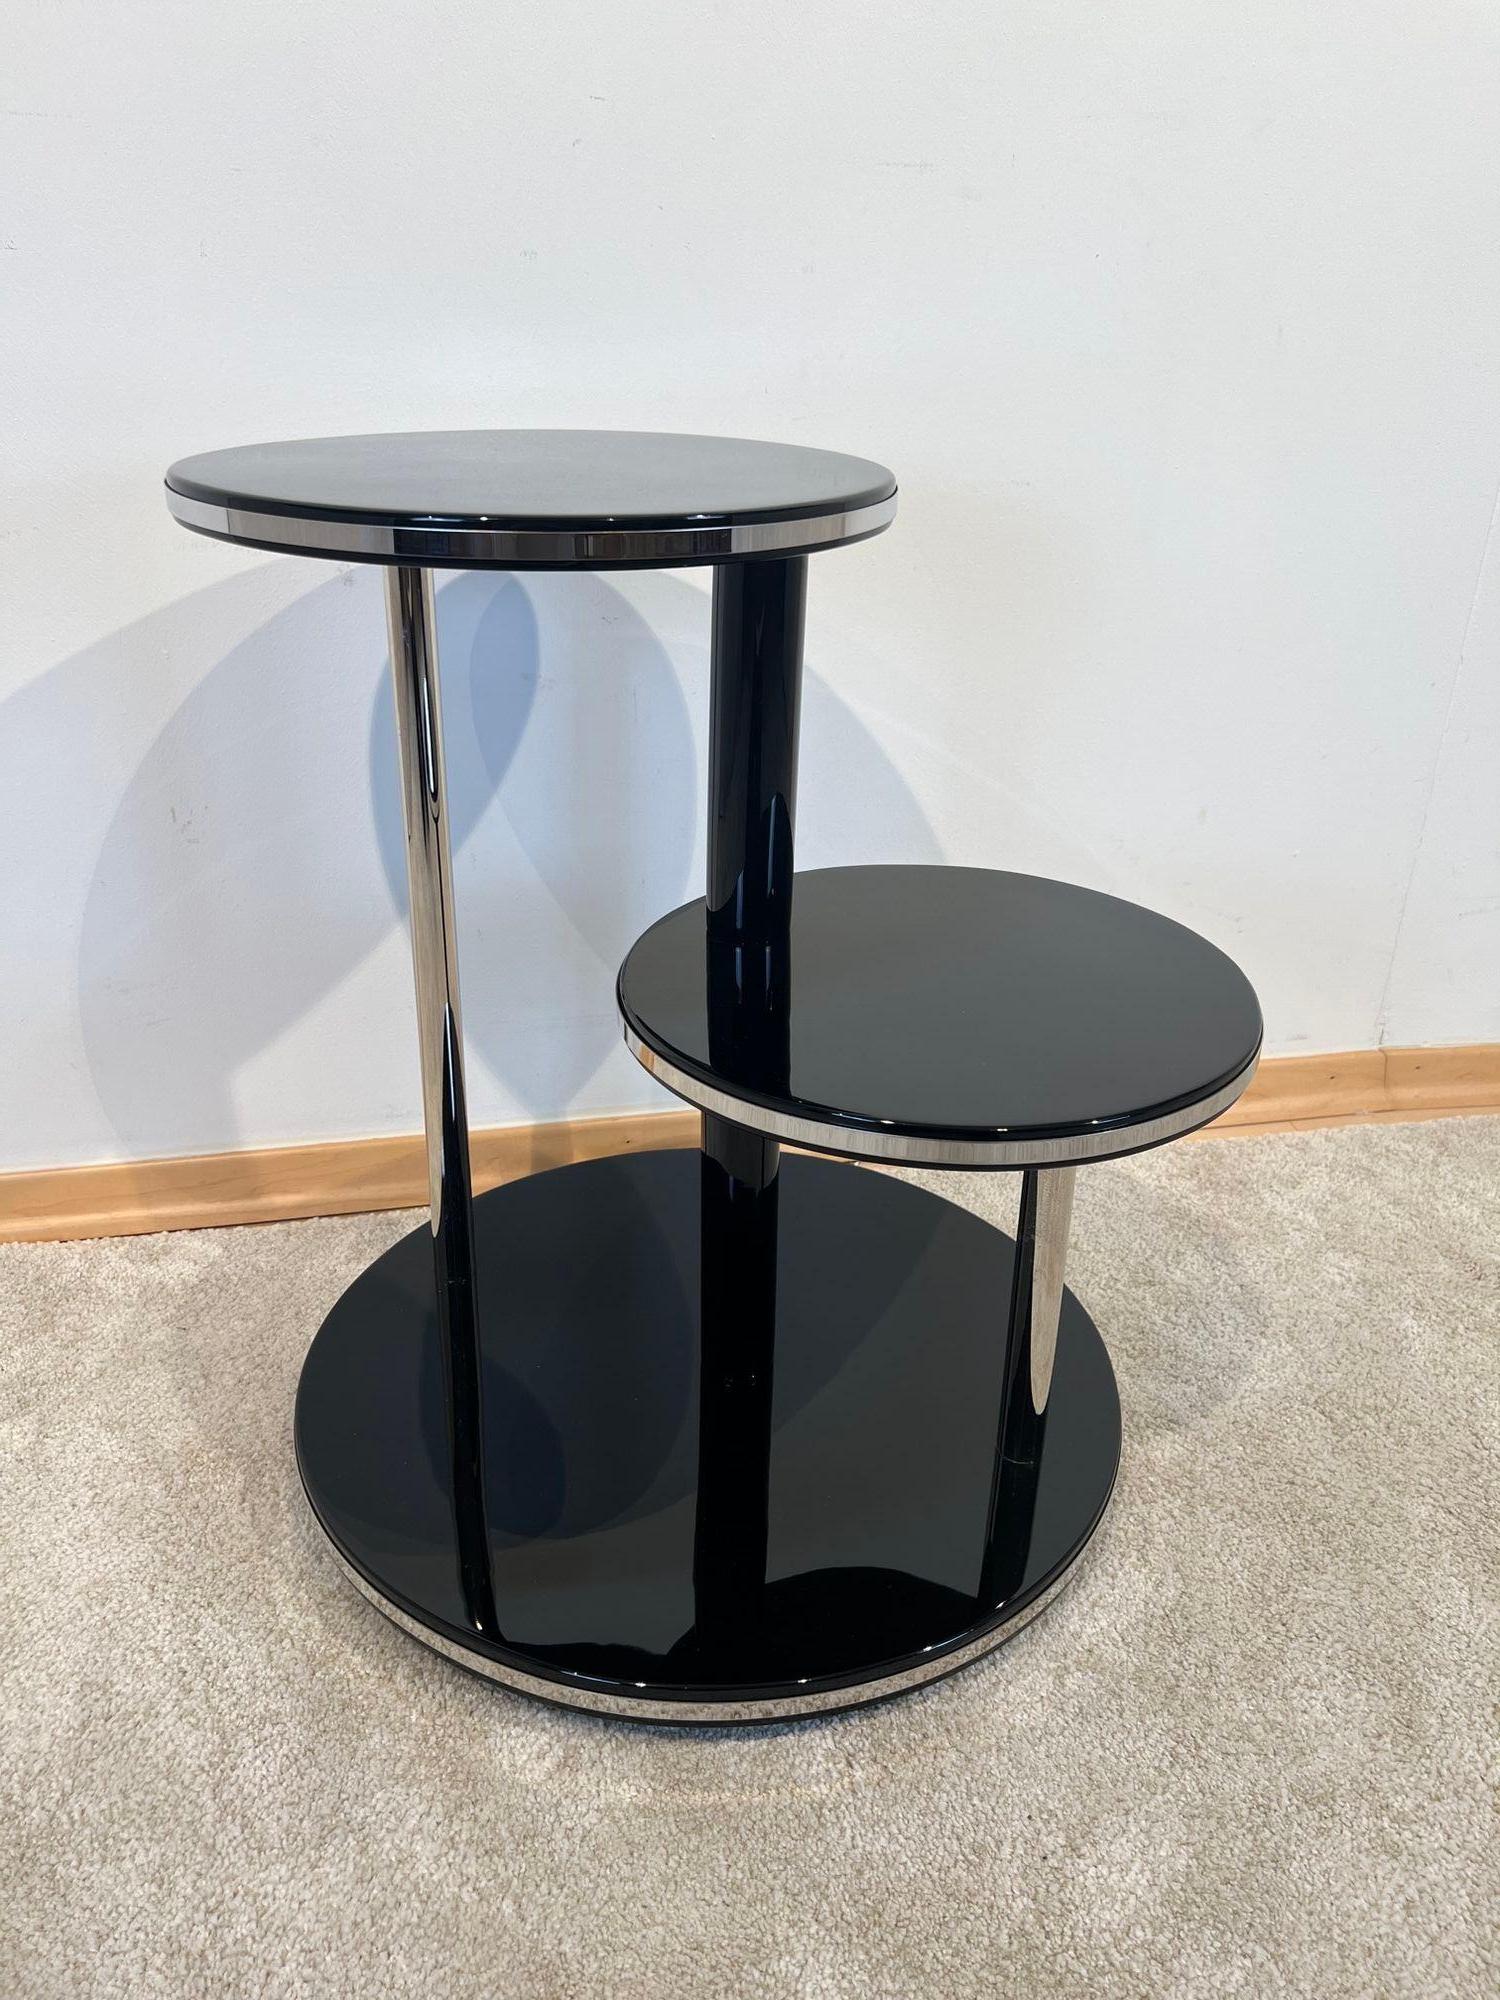 Art Deco Round Side Table, Black Lacquer, Chrome, Metal Trims, France circa 1930 For Sale 3